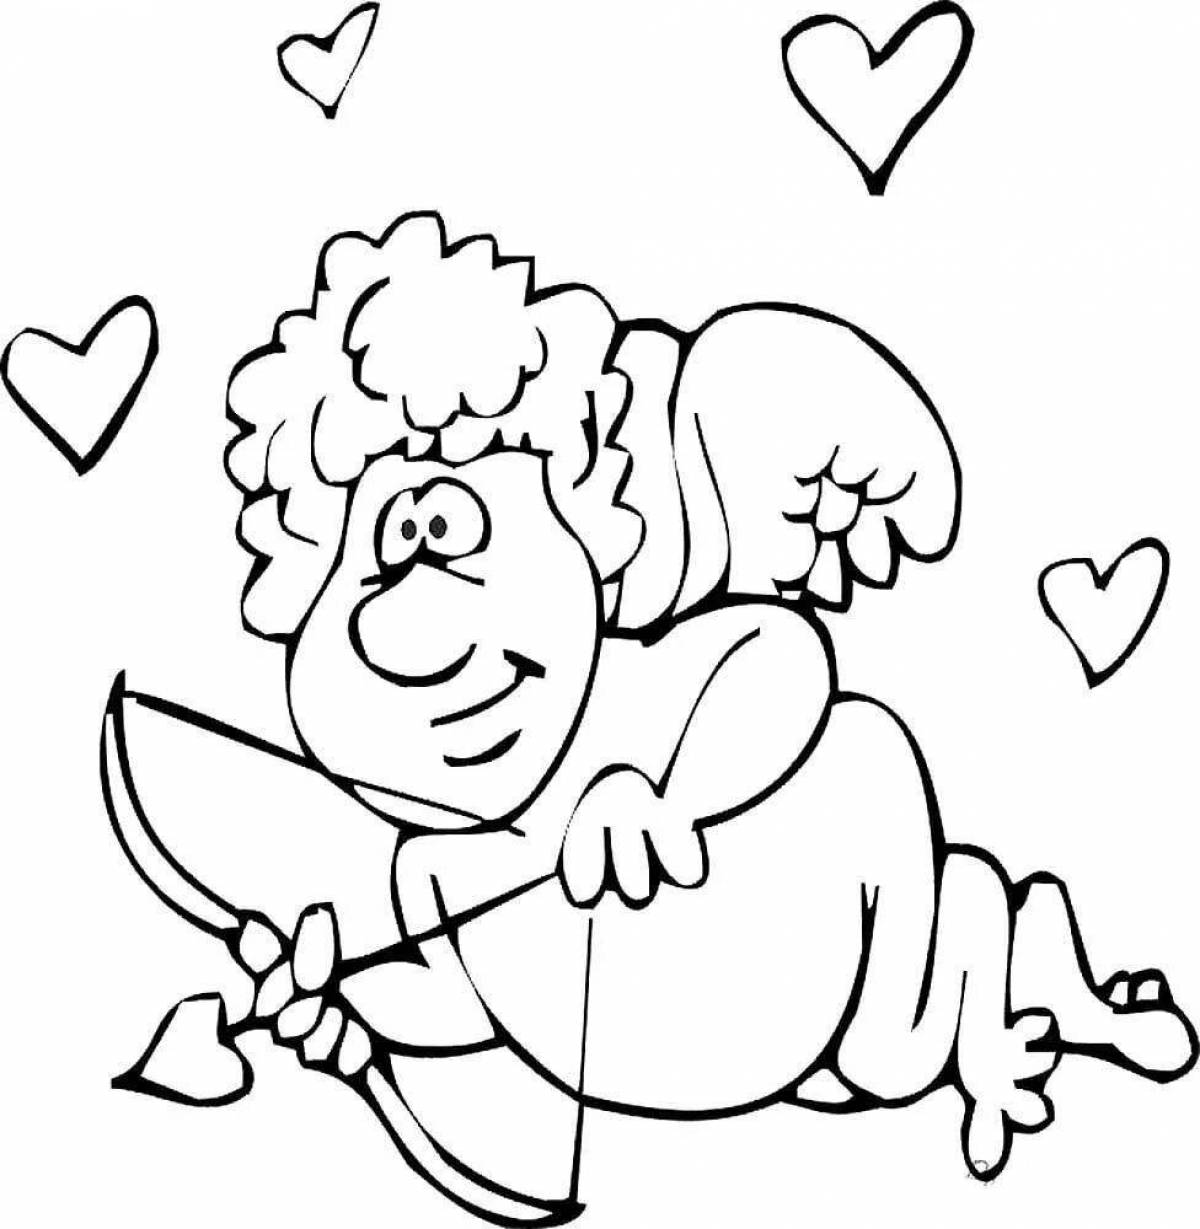 Funny cupid with heart coloring book